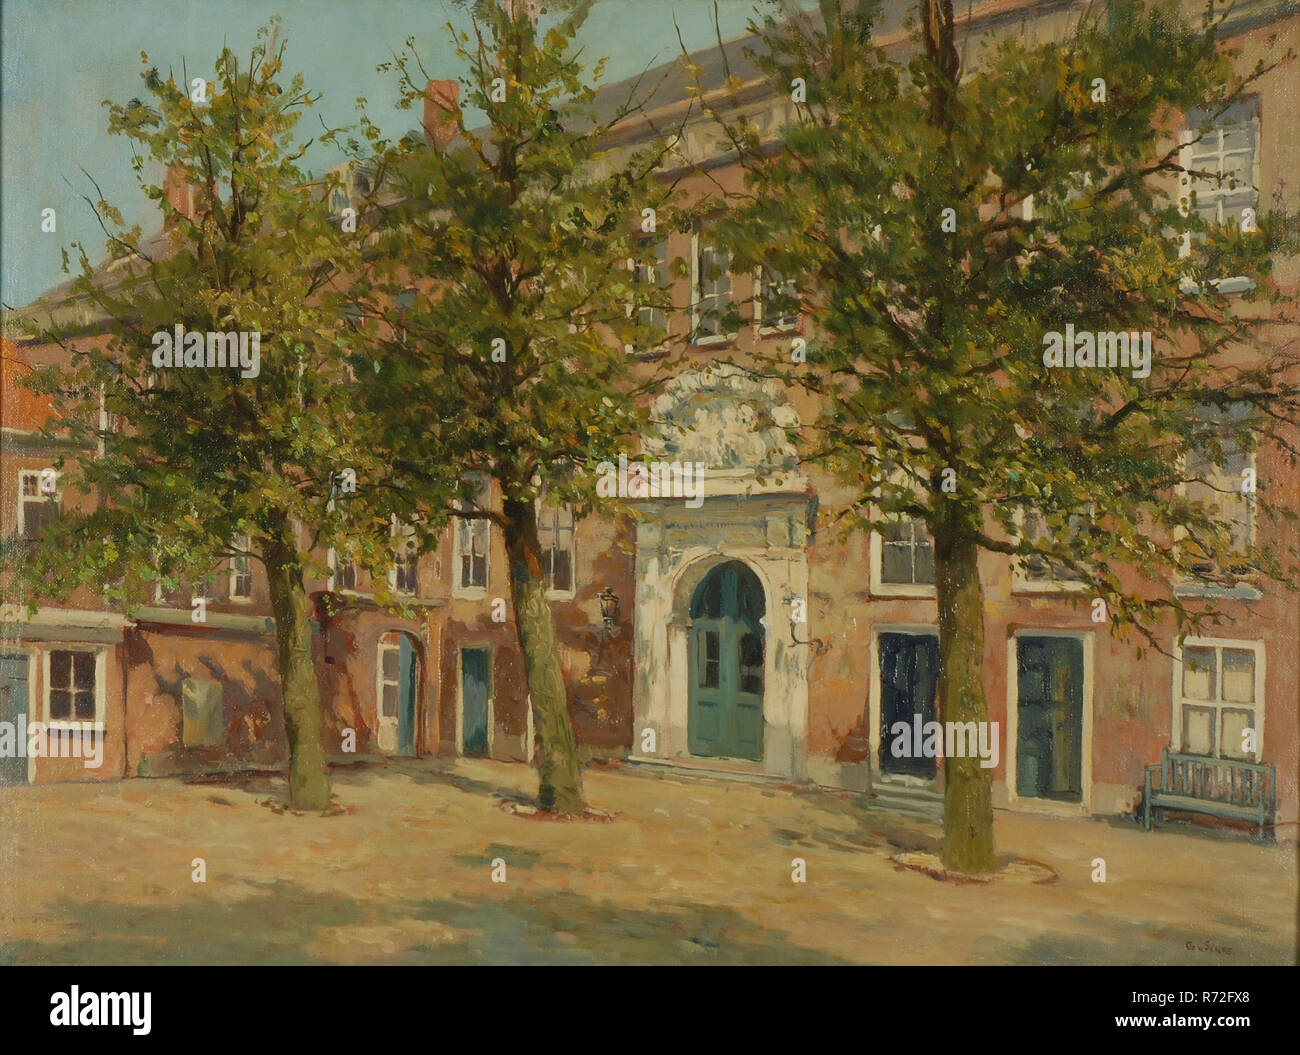 Jan Sirks, Courtyard of the Gereformeerd Burger Weeshuis in Rotterdam, painting visual material oil paint linen, Signature right: Jan Sirks Gereformeerd Burgerweeshuis Gereformeerd Burger Weeshuis Rotterdam City center Stadsdriehoek Goudsewagenstraat topography Stock Photo